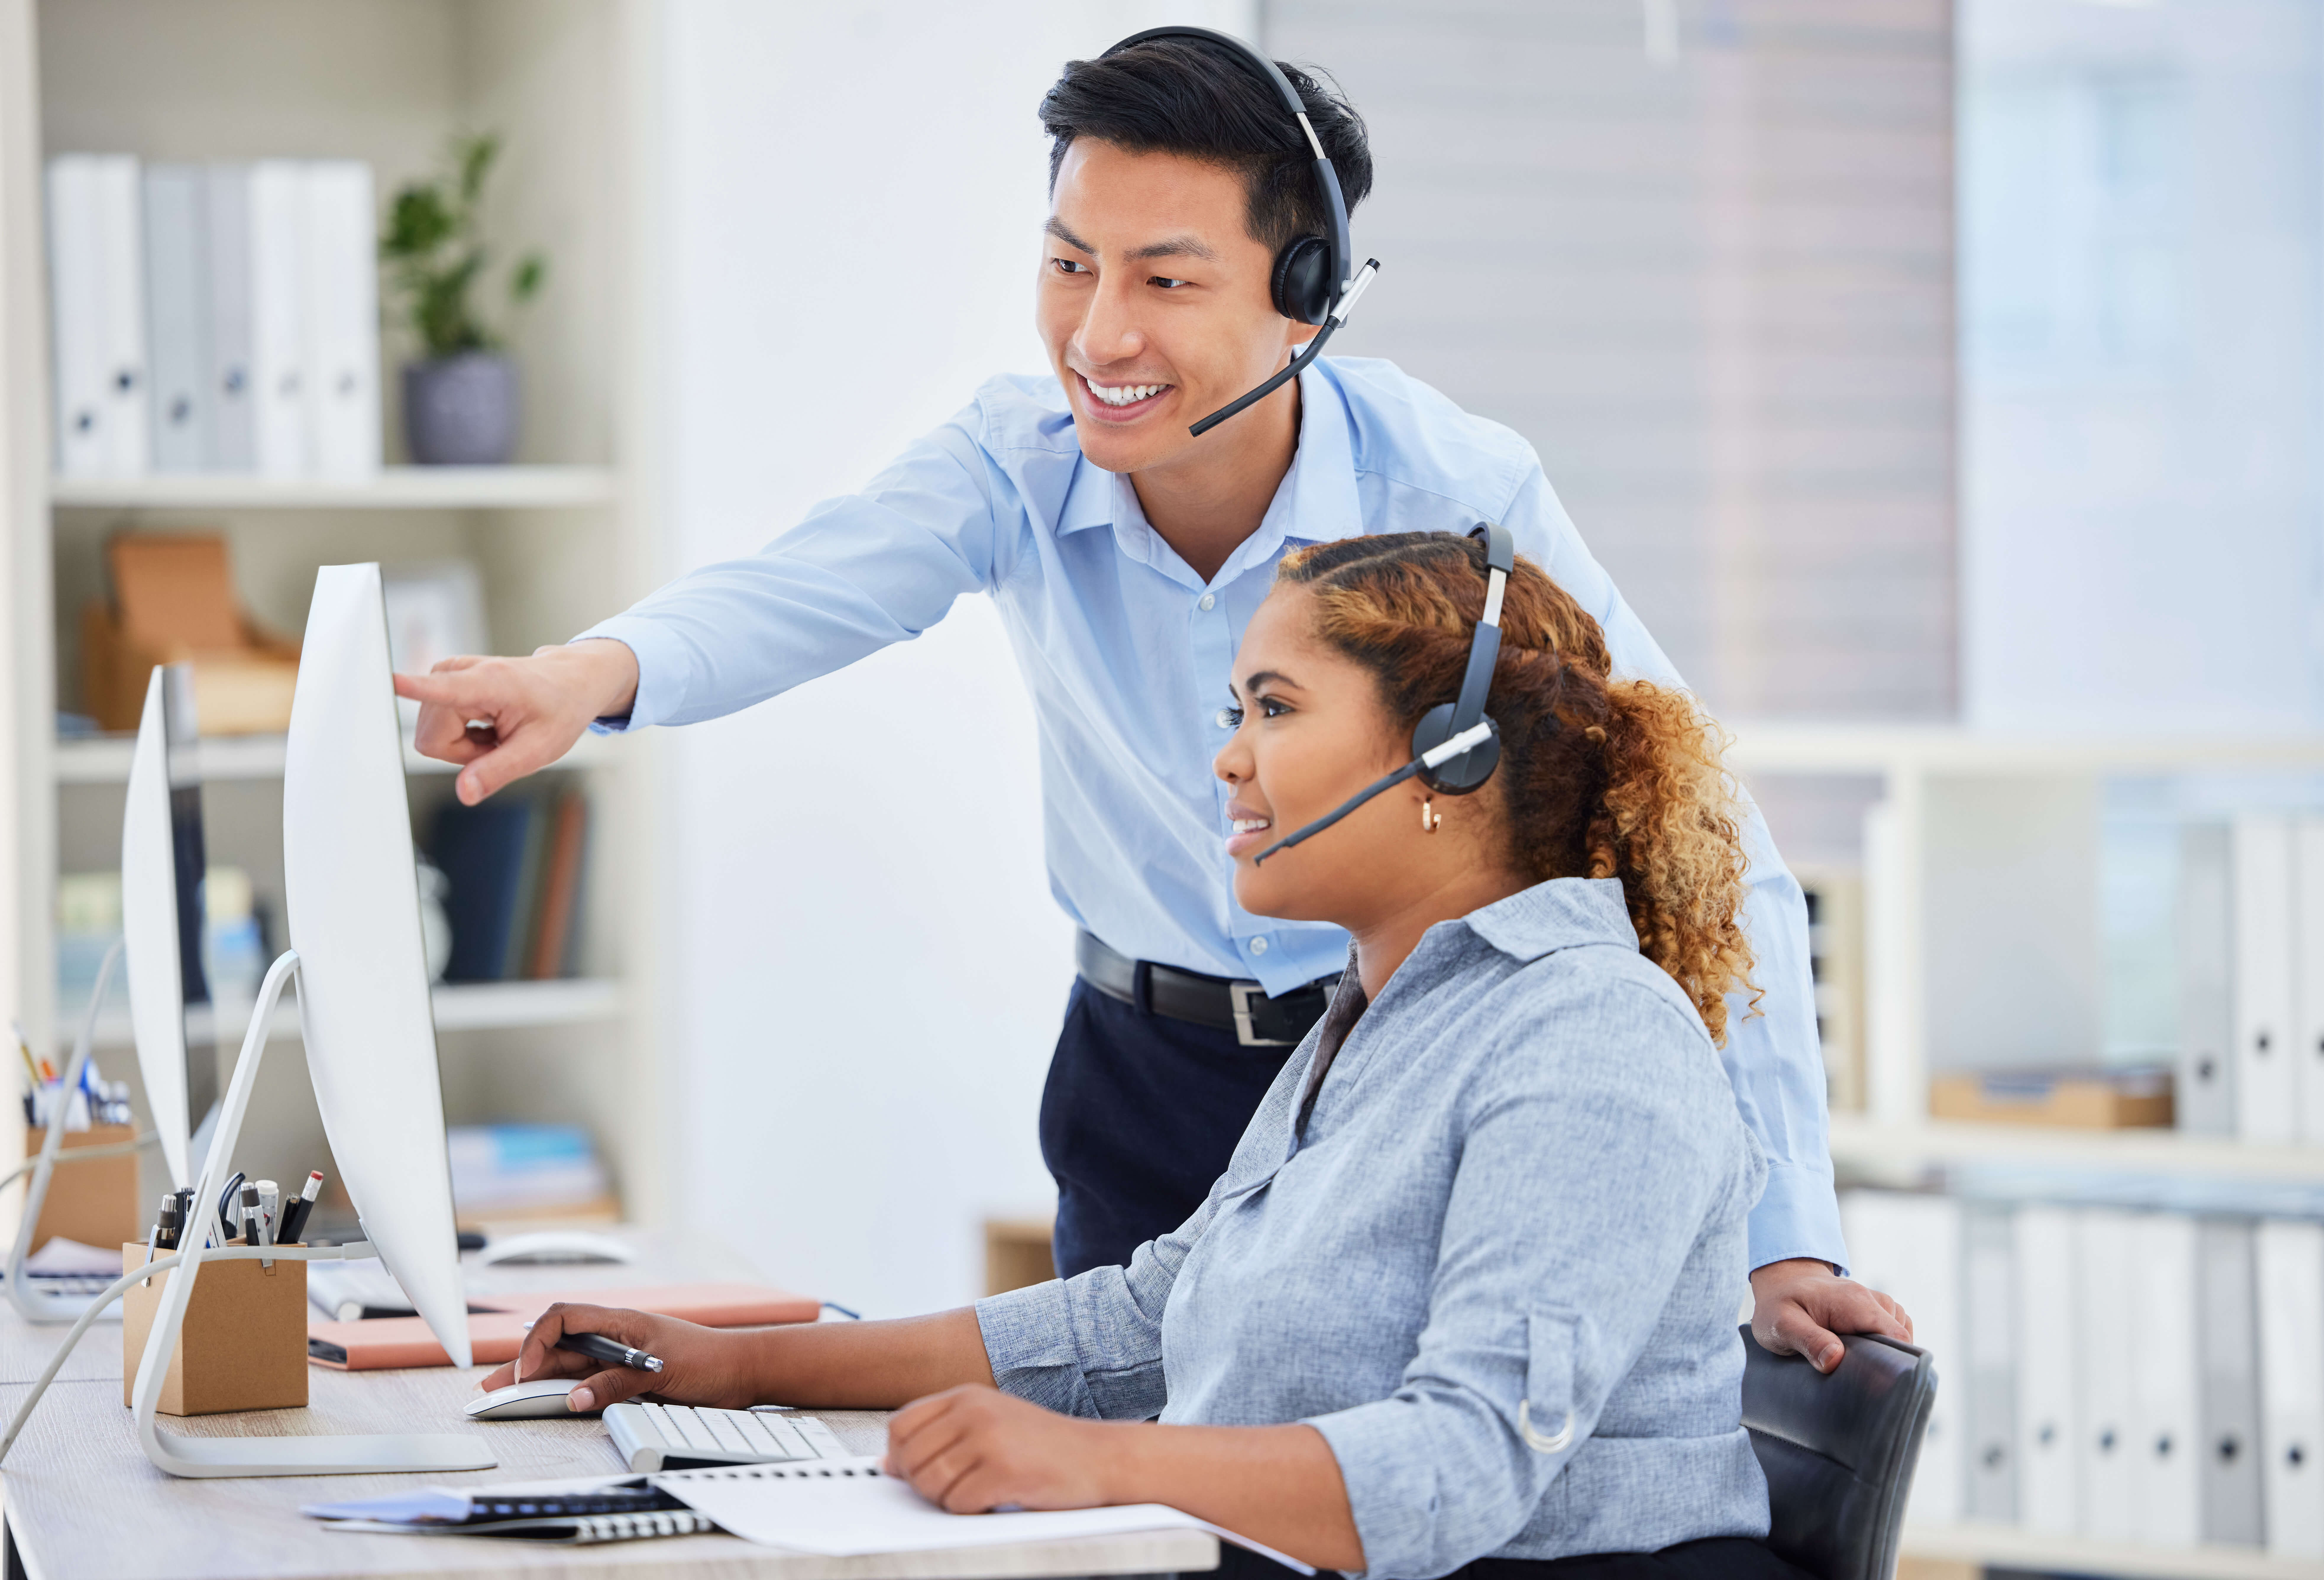 Customer support, training and manager with woman on computer for help, advice and assistance. Telemarketing, call center and female intern with Asian man boss for contact, crm service and consulting.